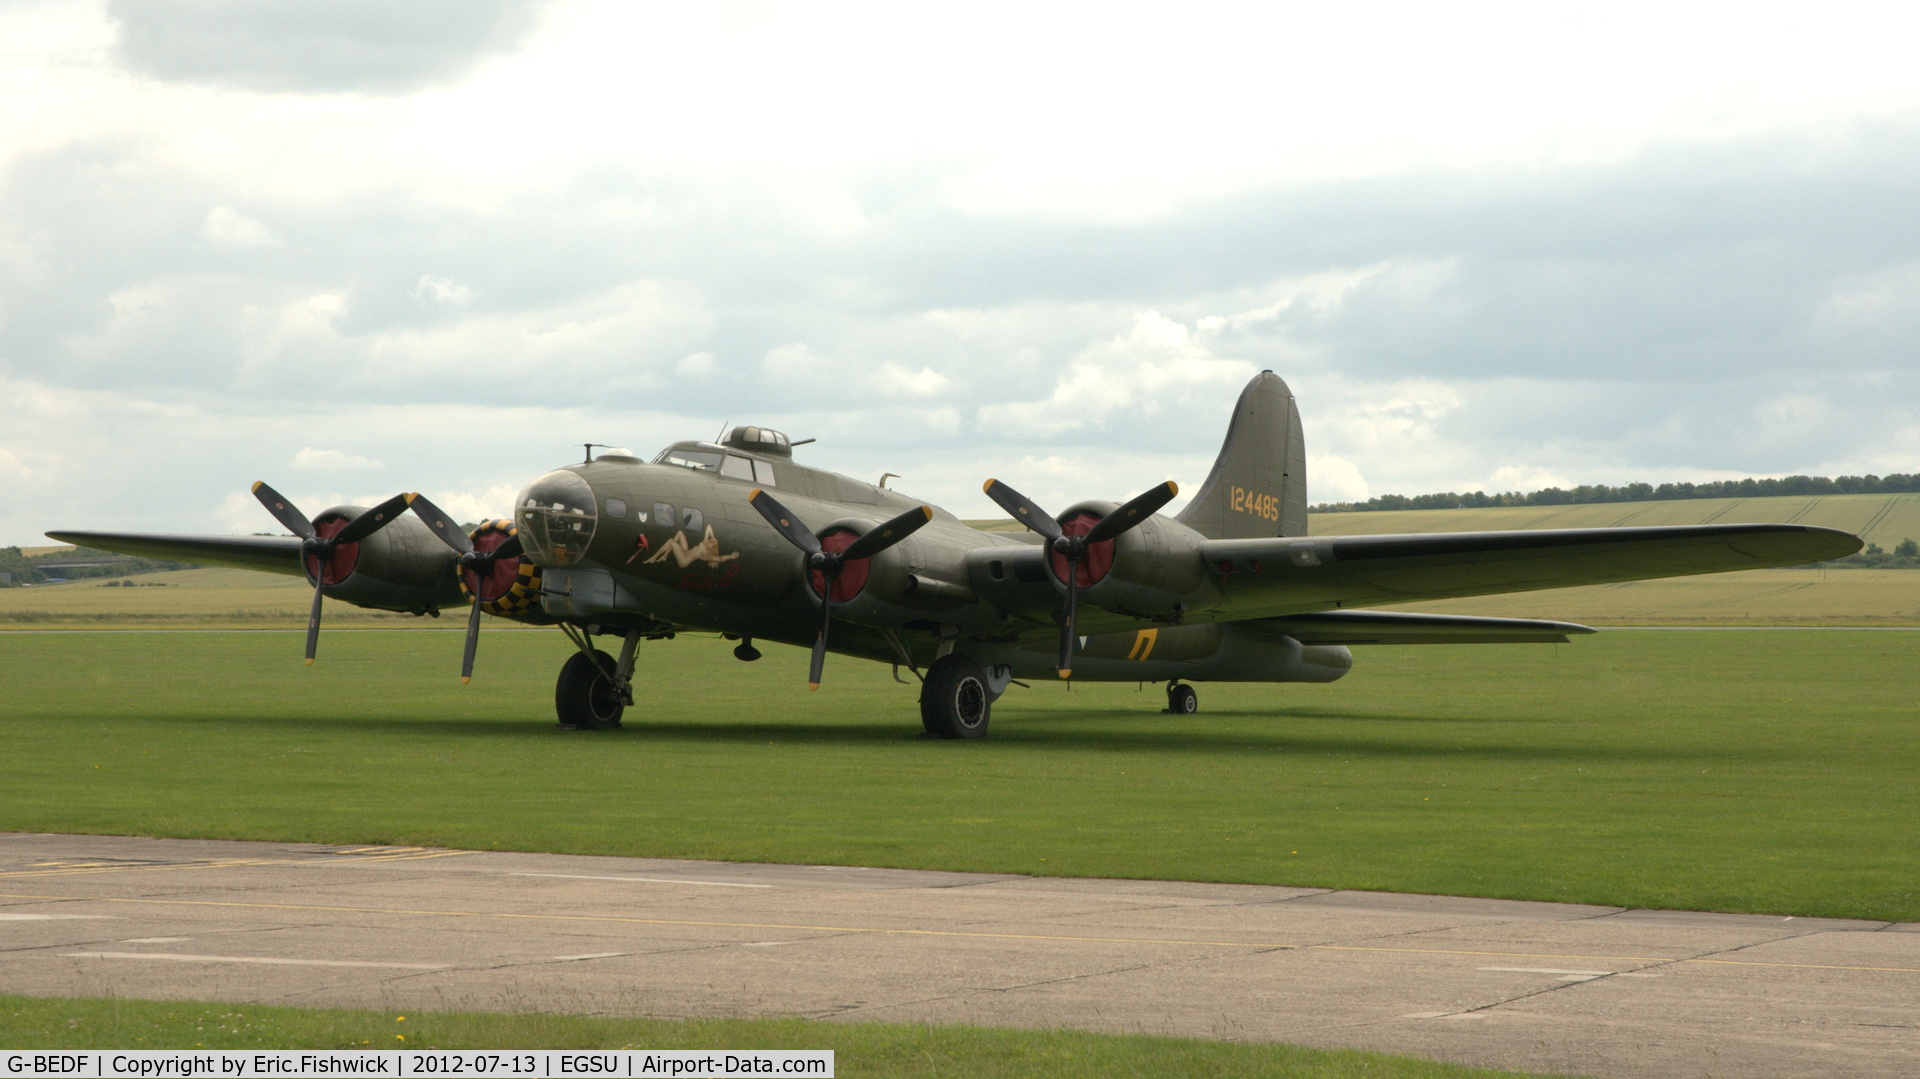 G-BEDF, 1944 Boeing B-17G Flying Fortress C/N 8693, 3. G-BEDF at the Imperial war Museum, Duxford